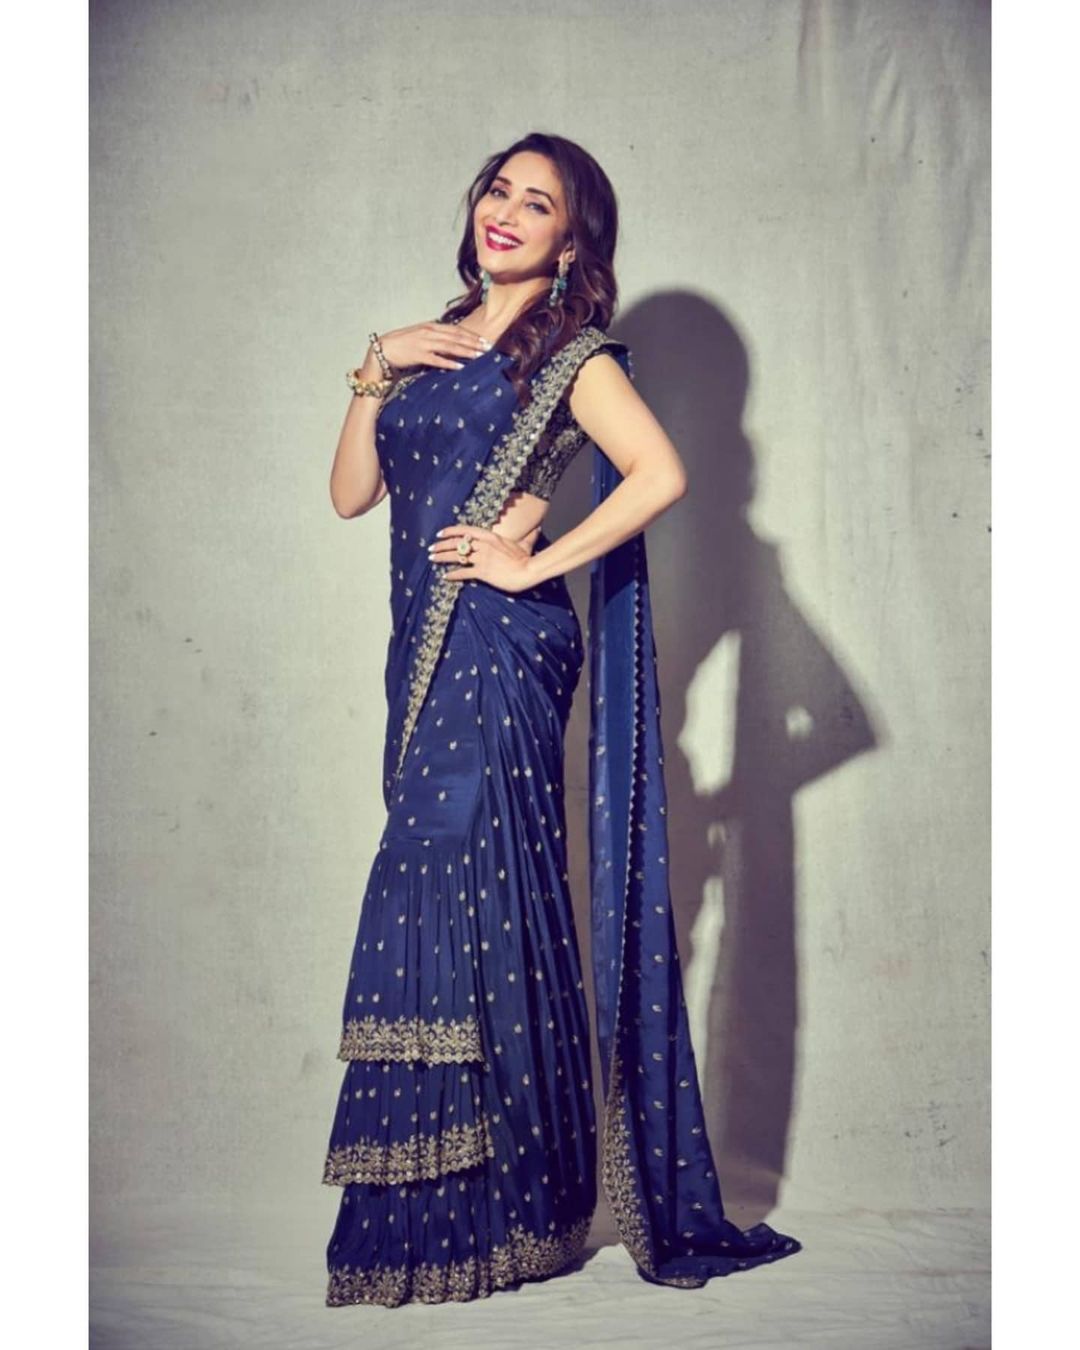 Madhuri Dixit keeps it playful in the stitched tiered saree. 